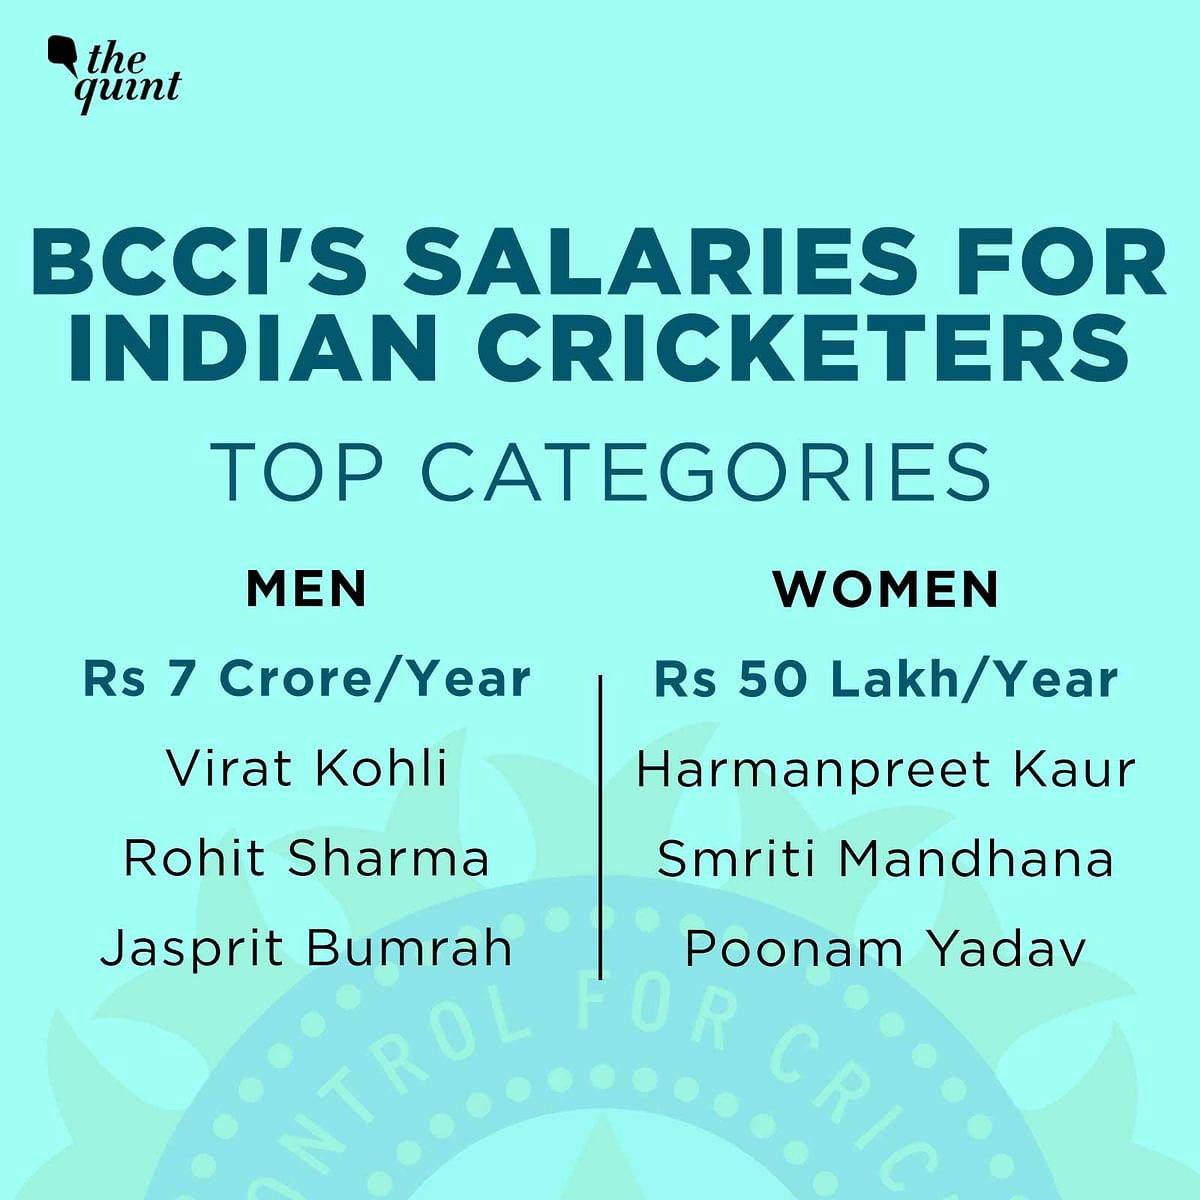 The glaring gap in salaries of Indian men’s and women’s cricketers needs to be addressed by the BCCI.